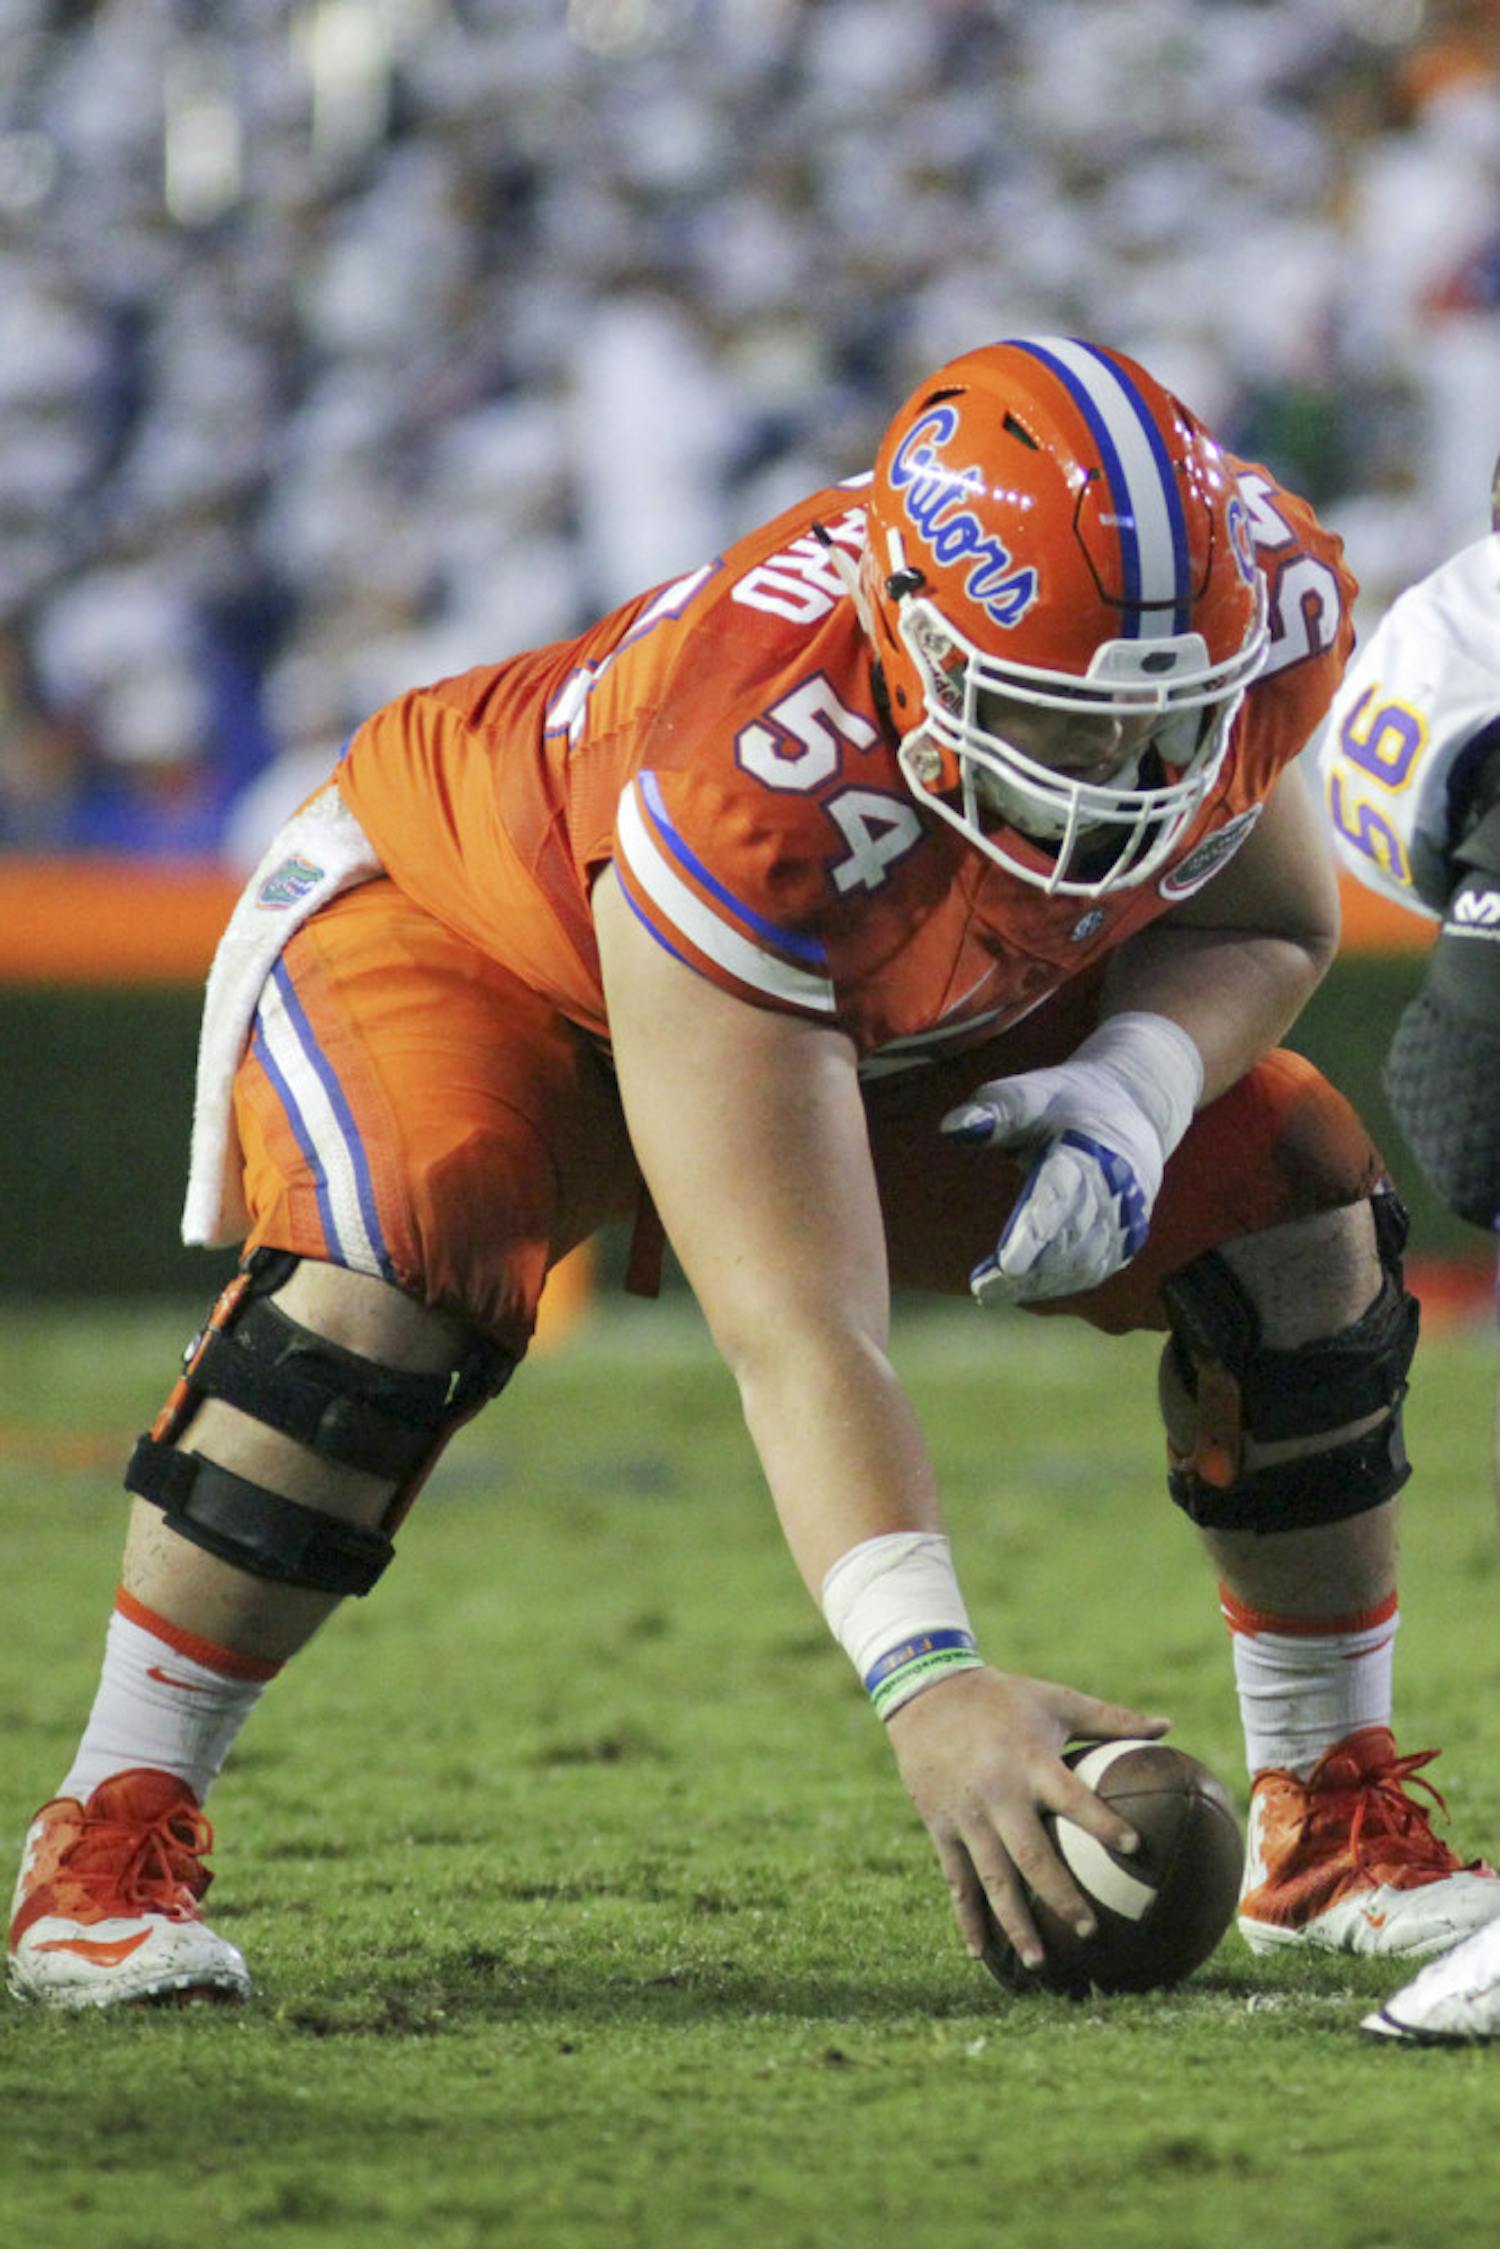 UF offensive lineman Cam Dillard prepares to snap the football during Florida's 31-24 win against East Carolina on Sept. 12, 2015, at Ben Hill Griffin Stadium.